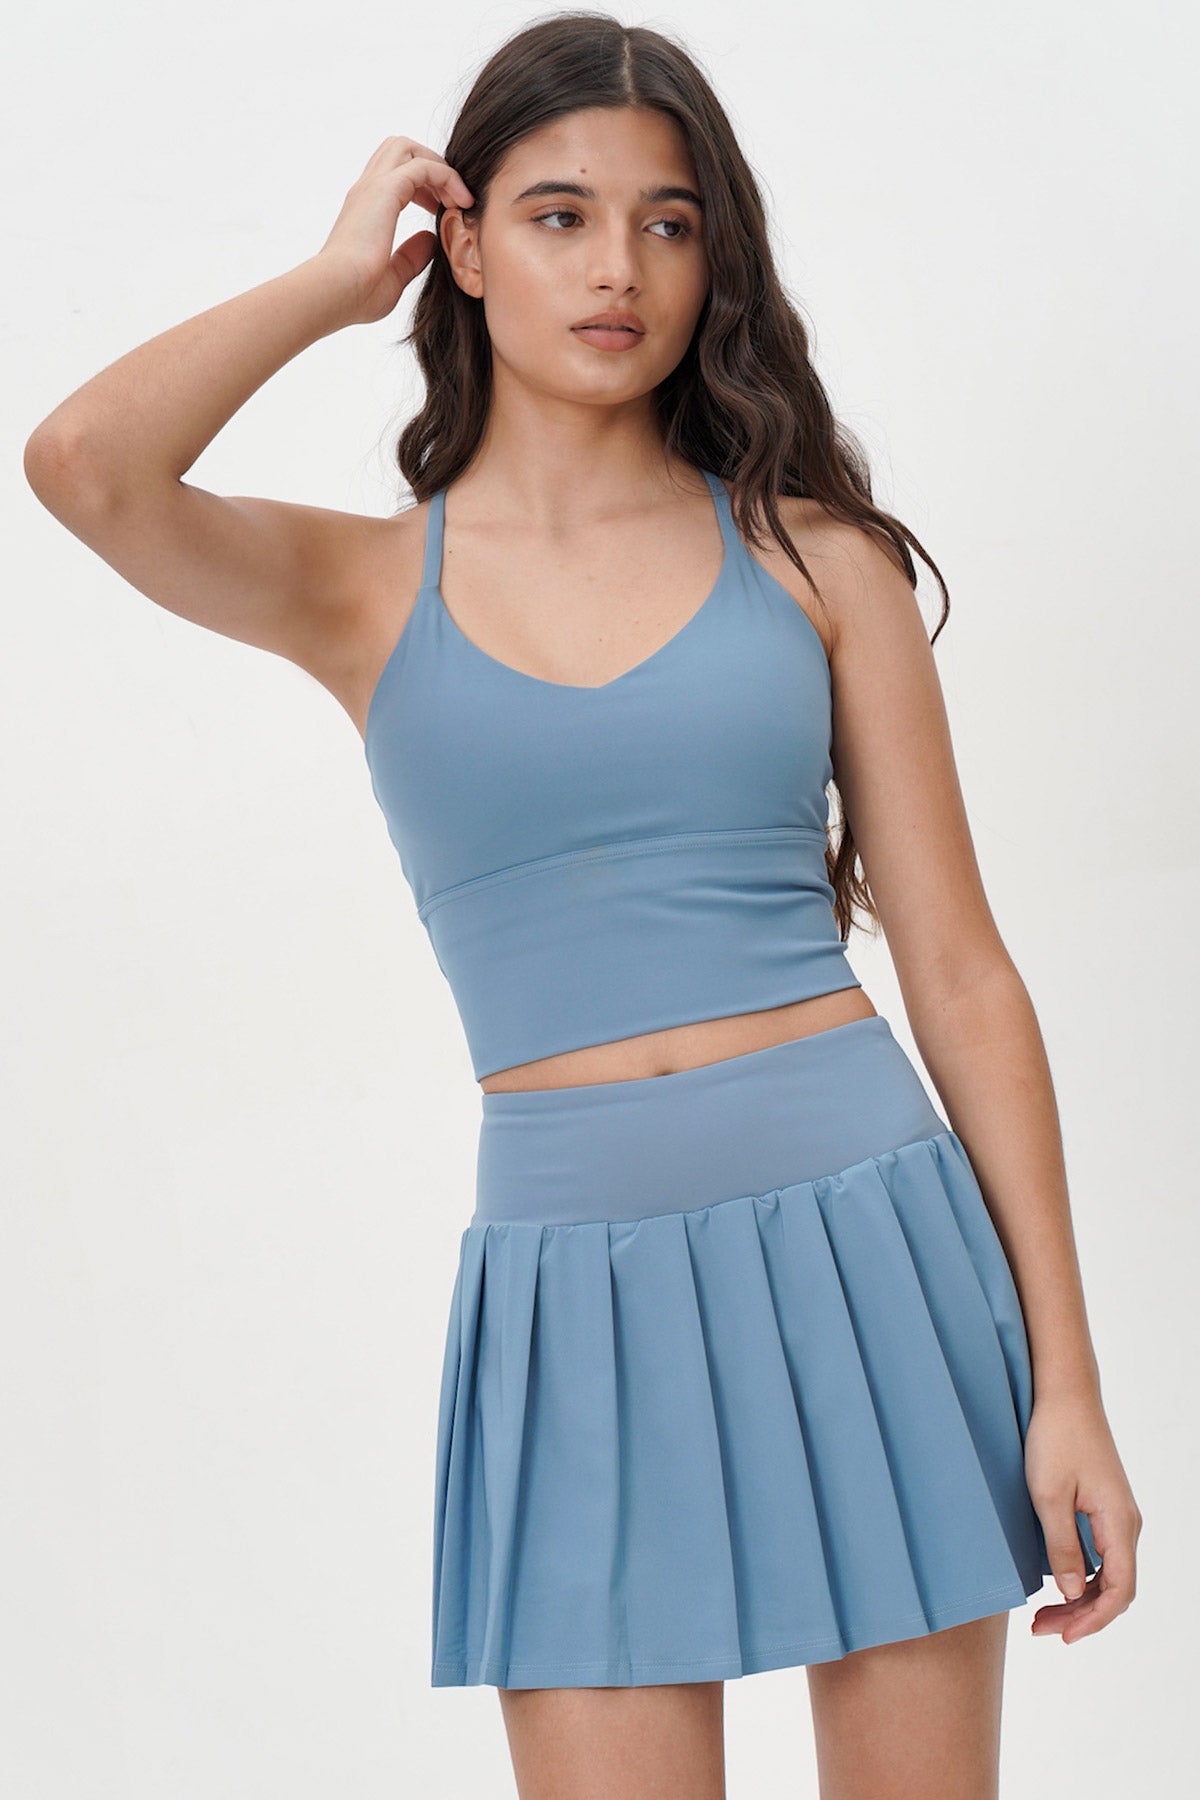 Ace Tennis Skirt In French Blue (4 LEFT)